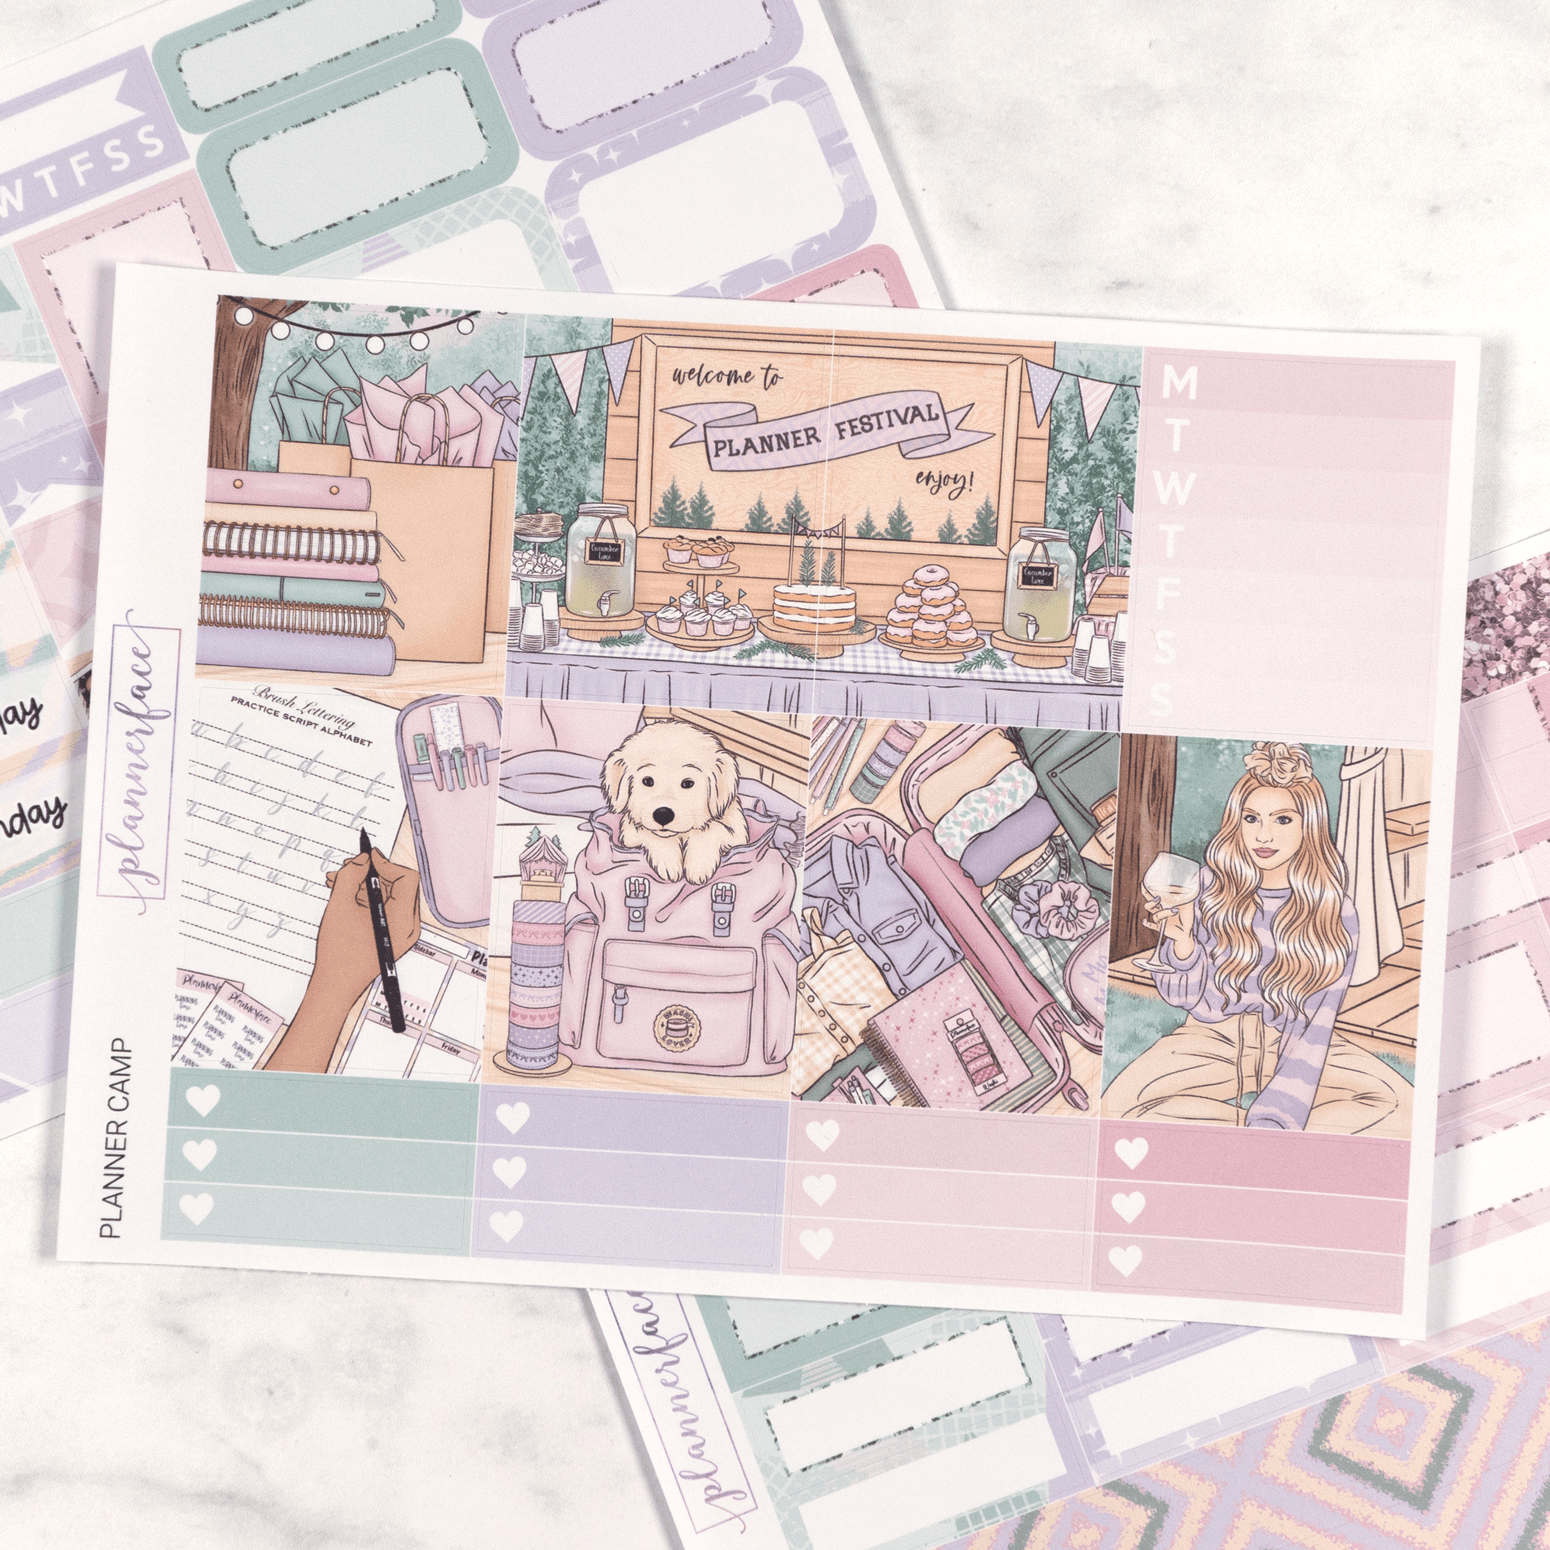 Planner Camp Mini Kit by Plannerface